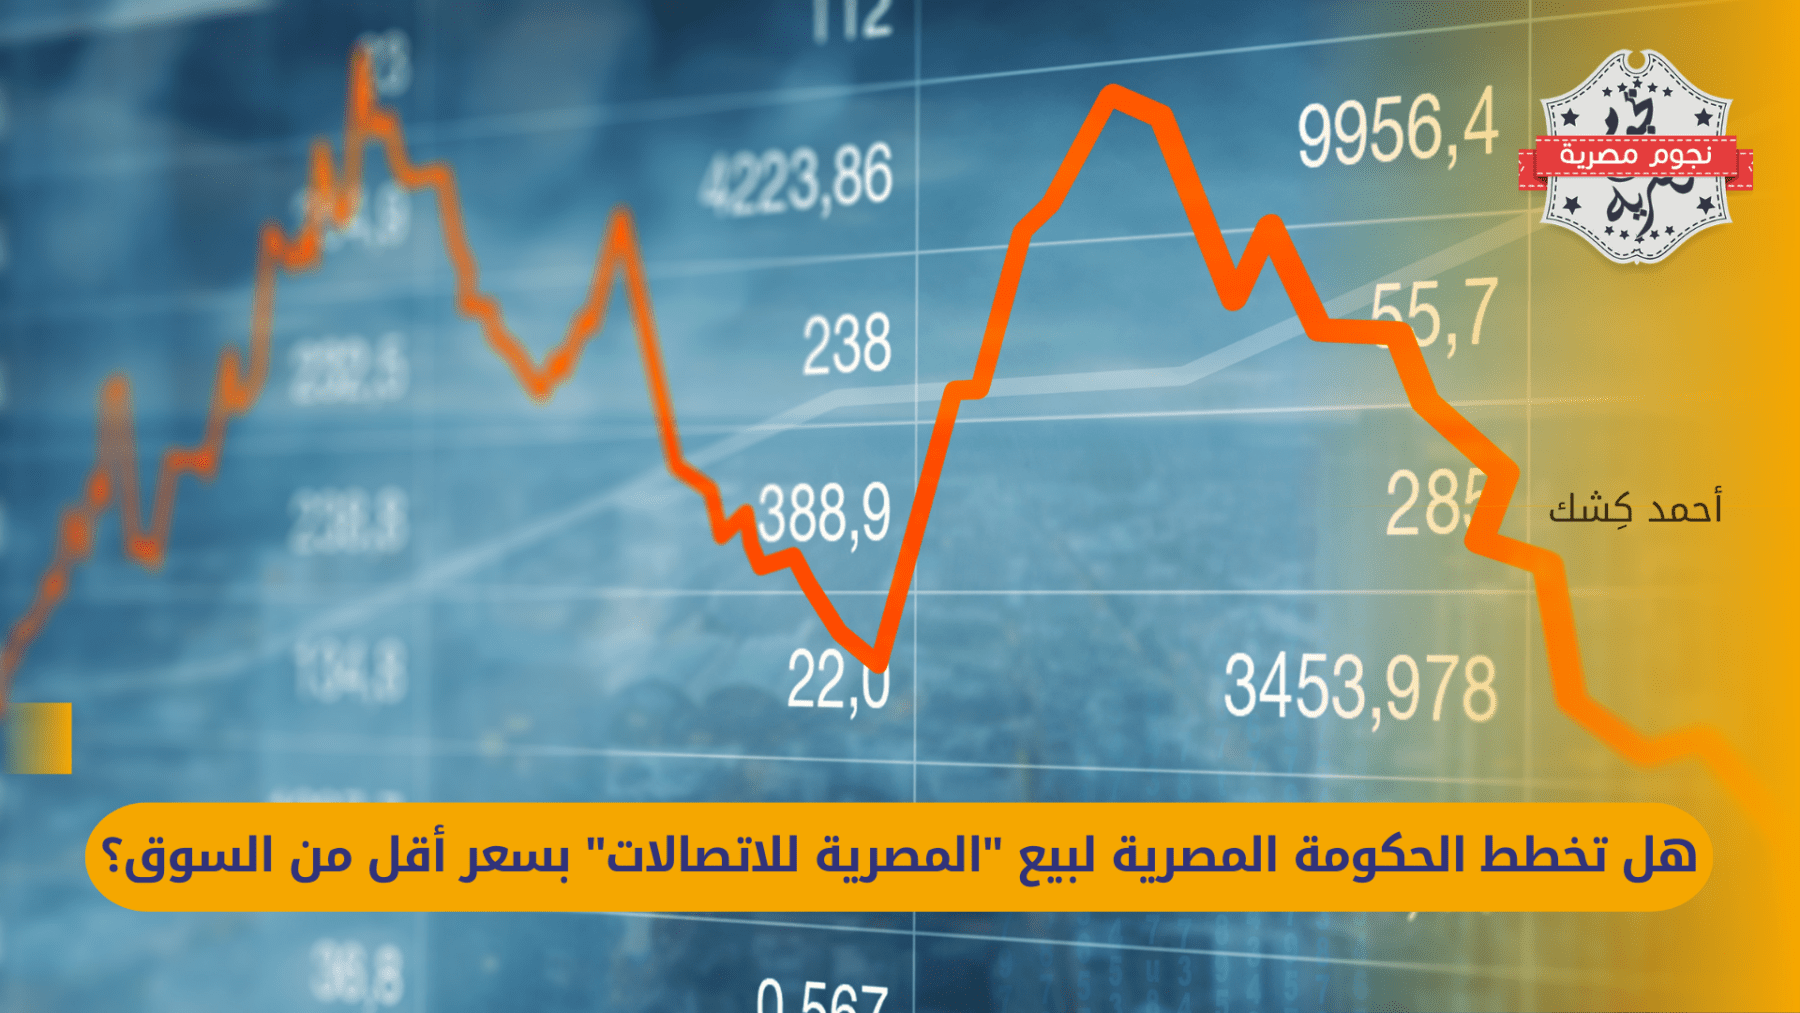 egyptian-telecoms-government-sells-additional-stake-on-stock-exchange